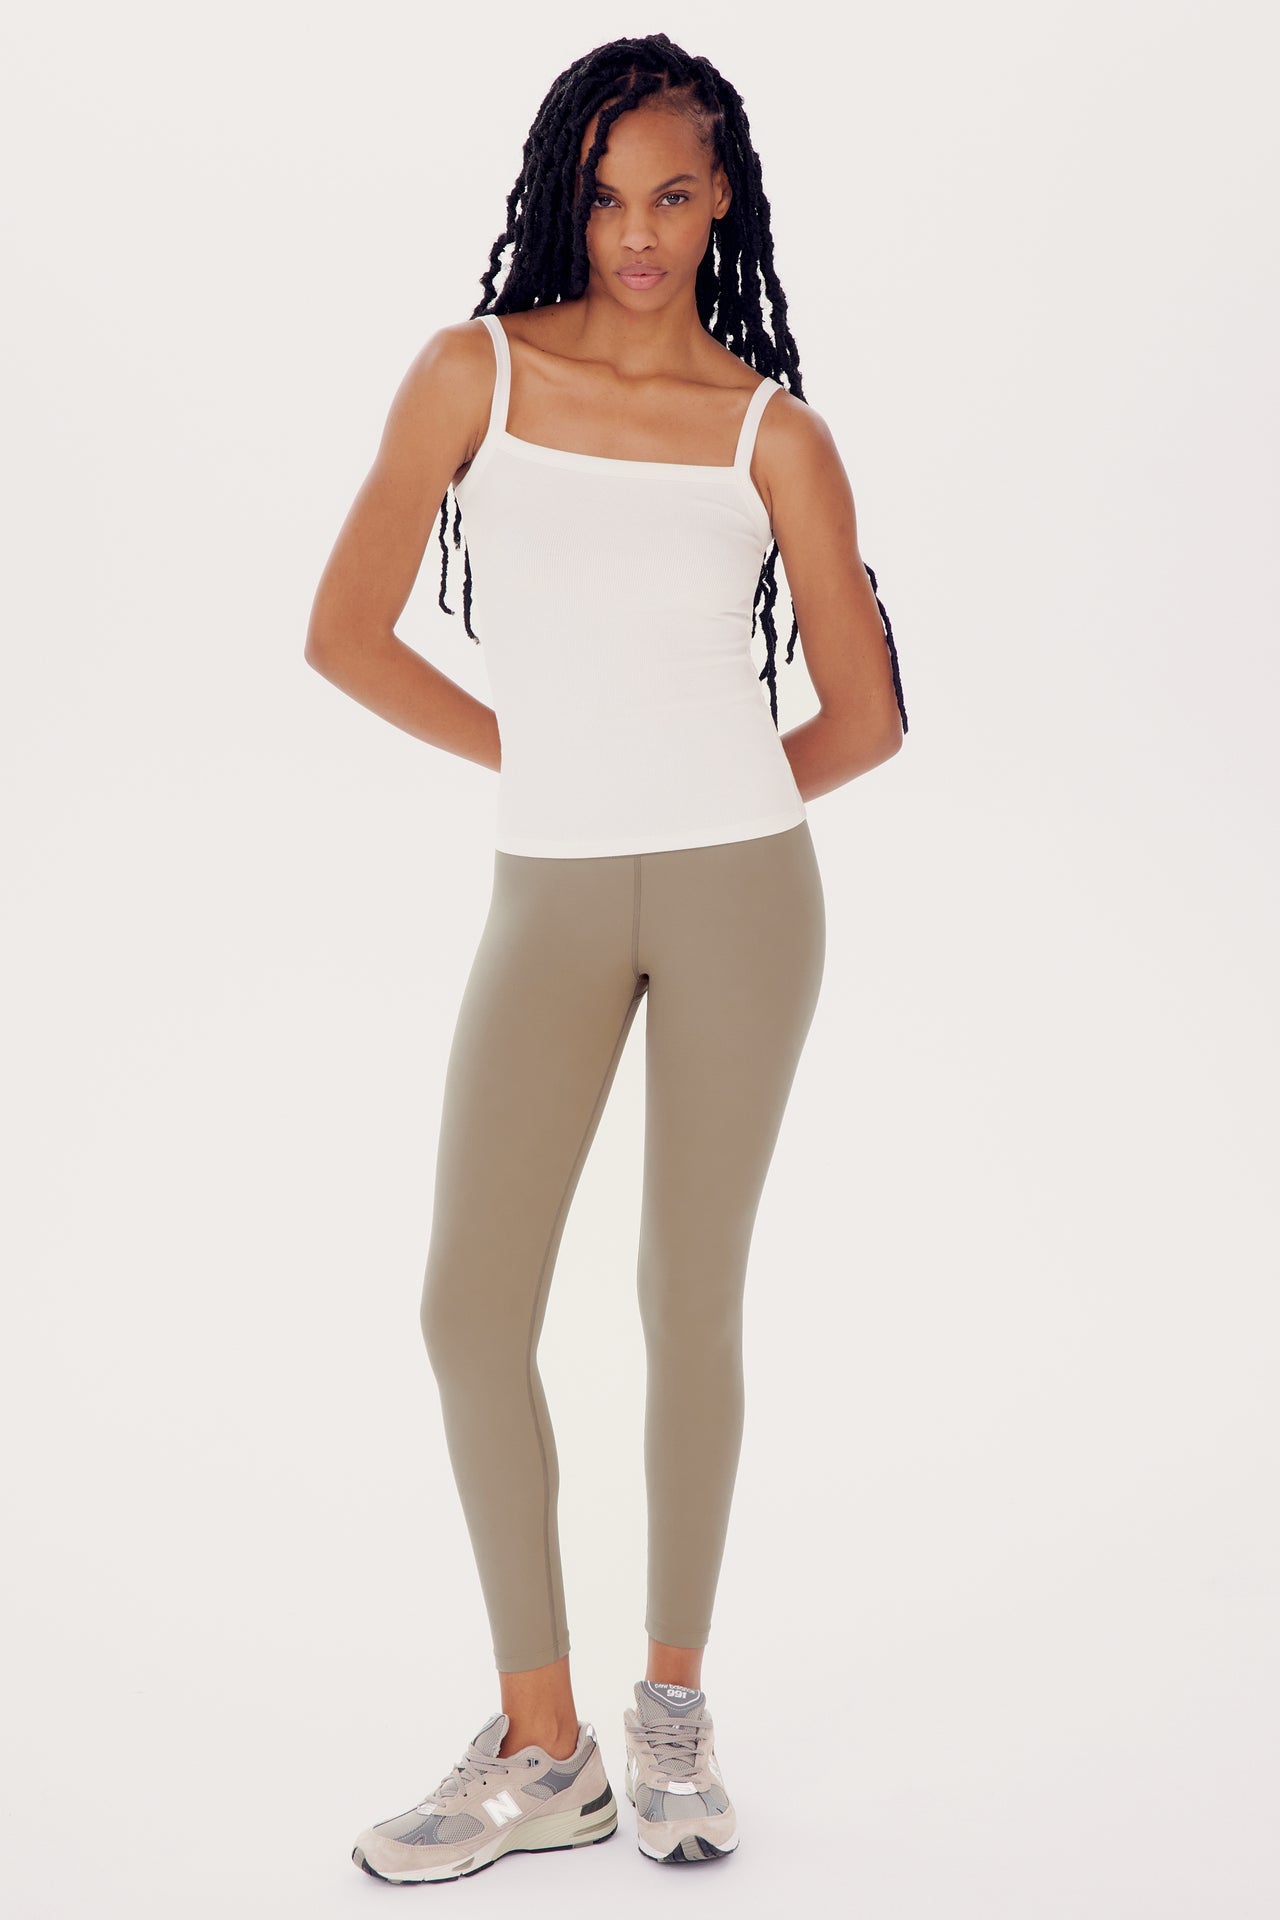 A woman in a white tank top and olive green Sprint High Waist Rigor 7/8 - Latte leggings stands with her hands at her sides, wearing silver sneakers, against a white background.